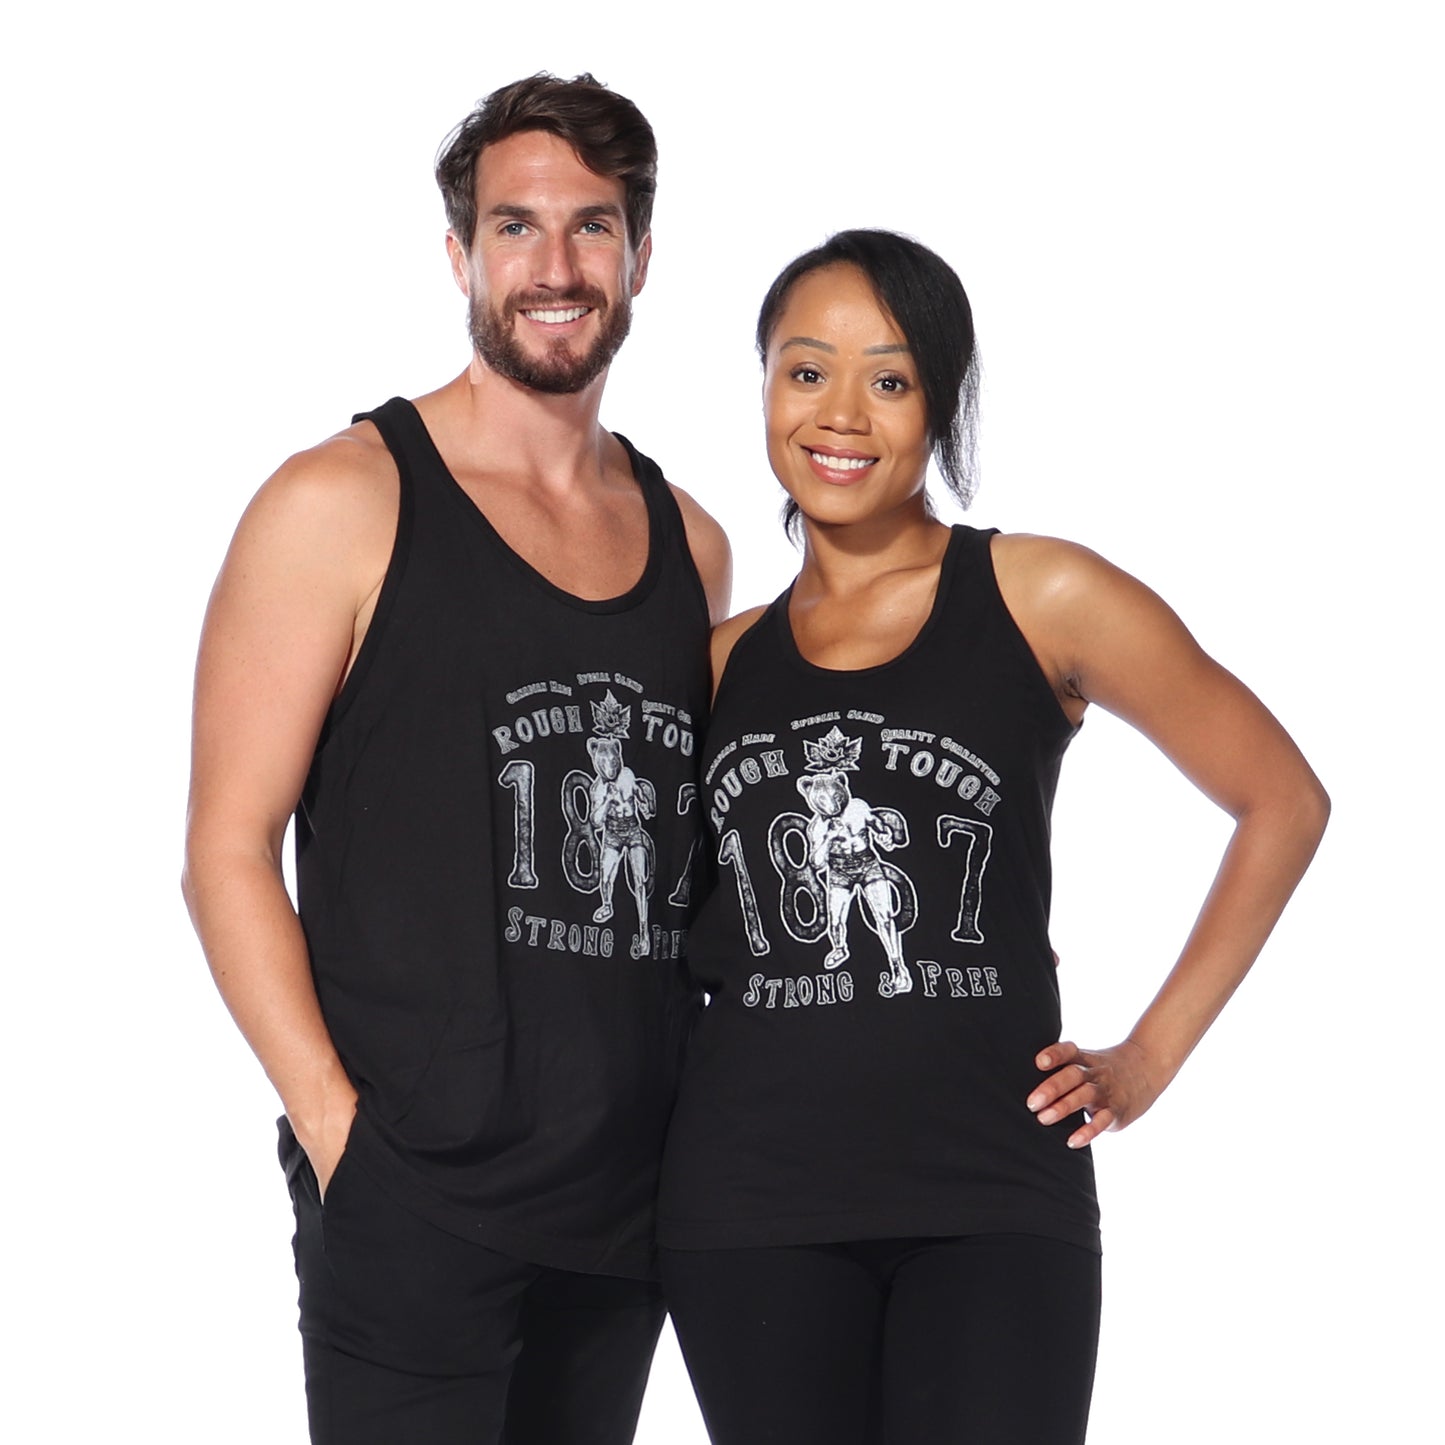 Discontinued Sale Tank: Rough, Tough, Strong and Free